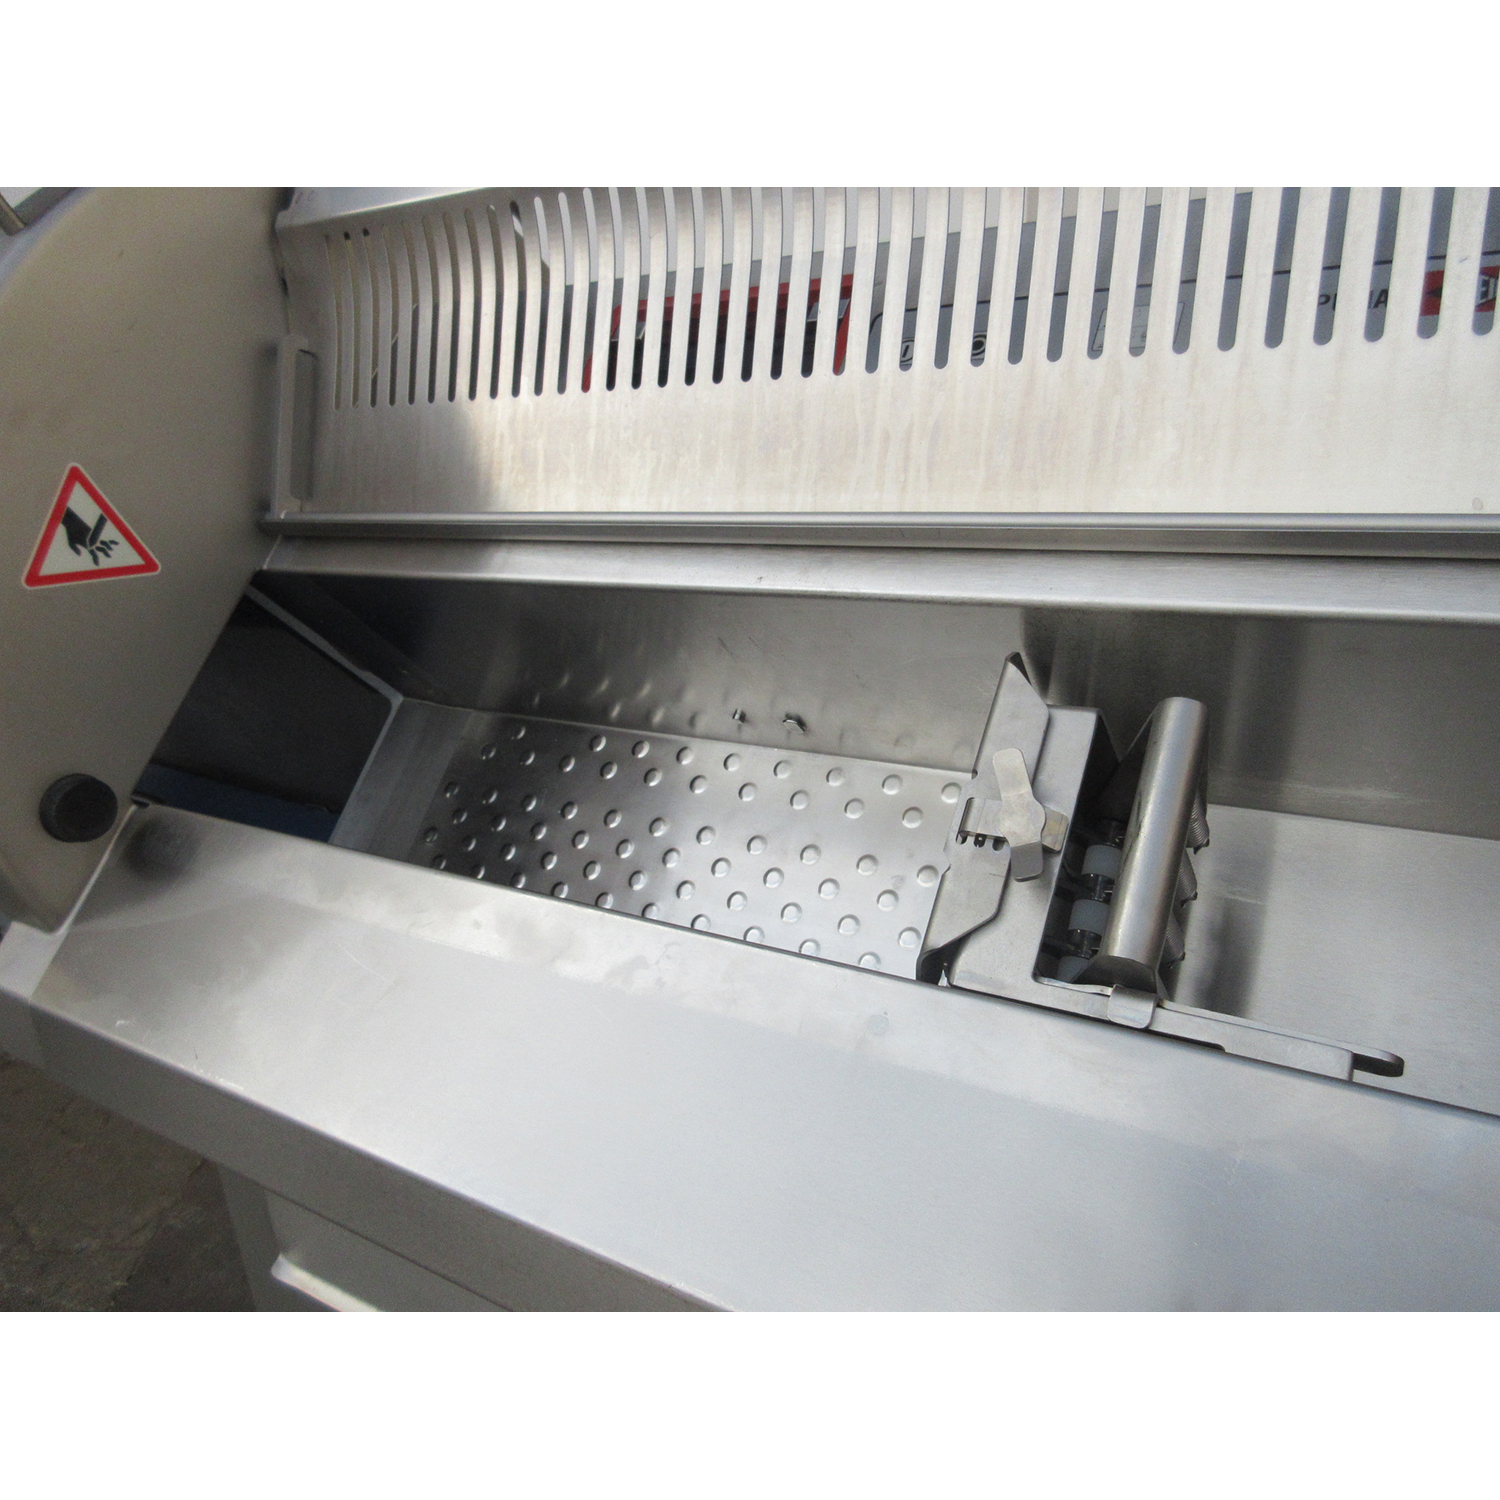 Treif PUMA CE 700EB Meat Portion Slicer, Used Excellent Condition image 3